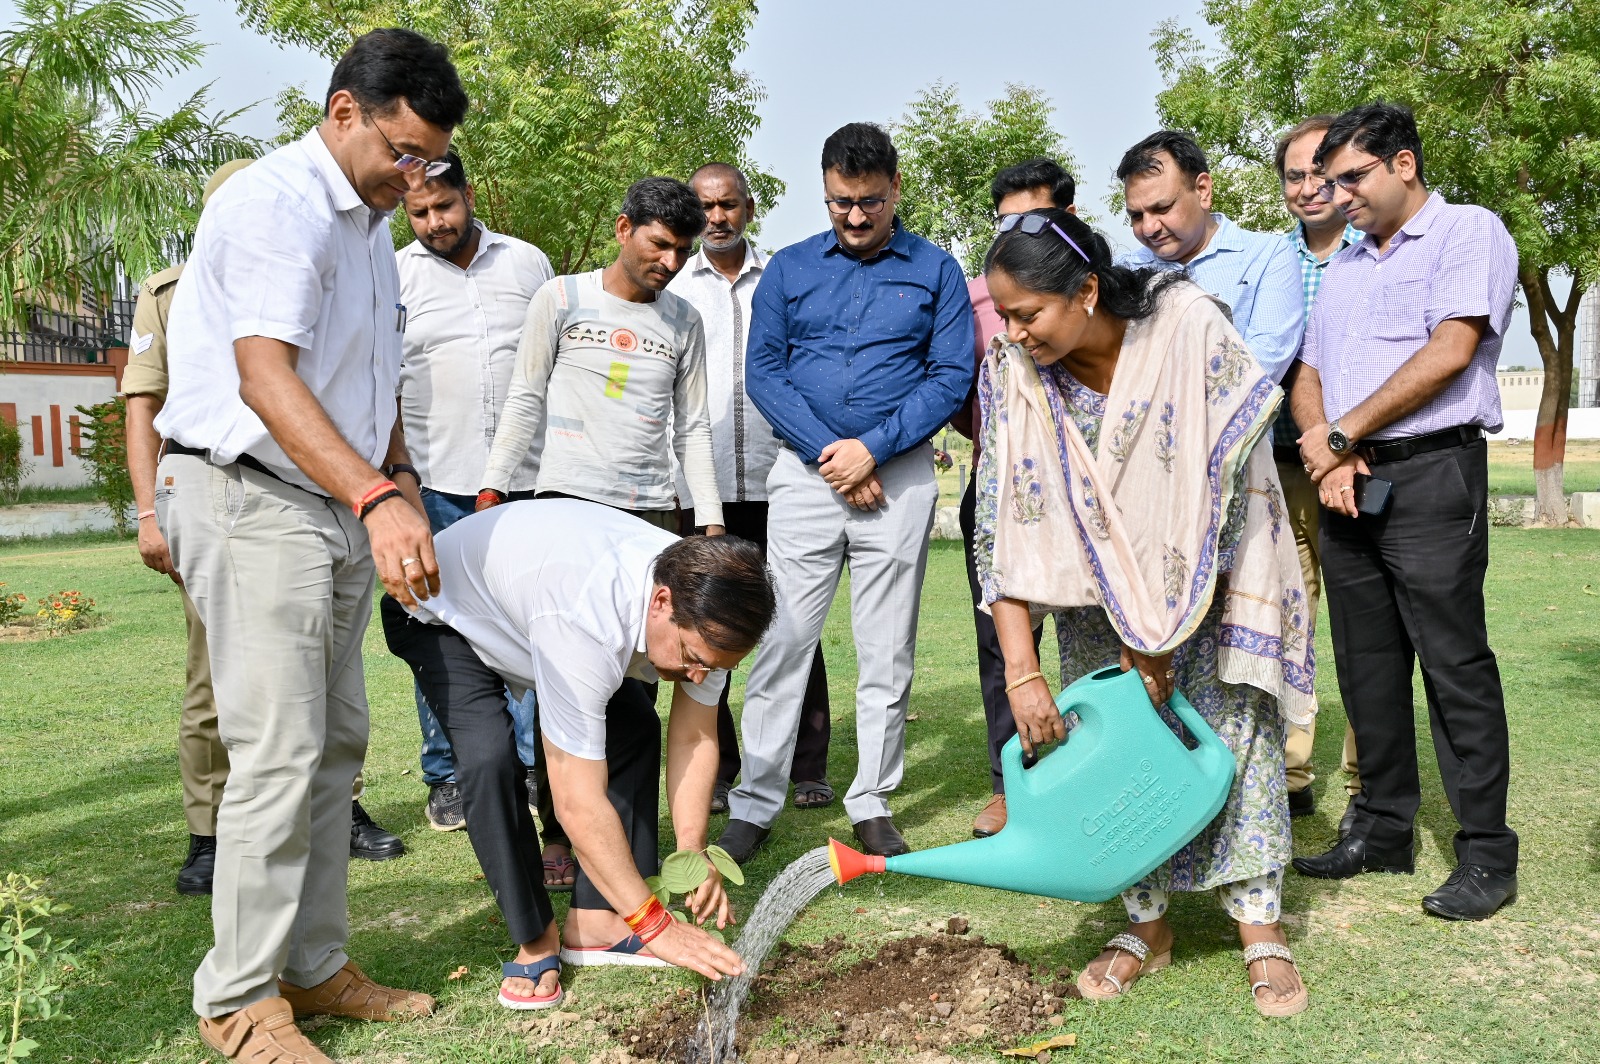 Vice Chancellor Prof. JP Pandey said, it is our responsibility to plant trees to save the environment